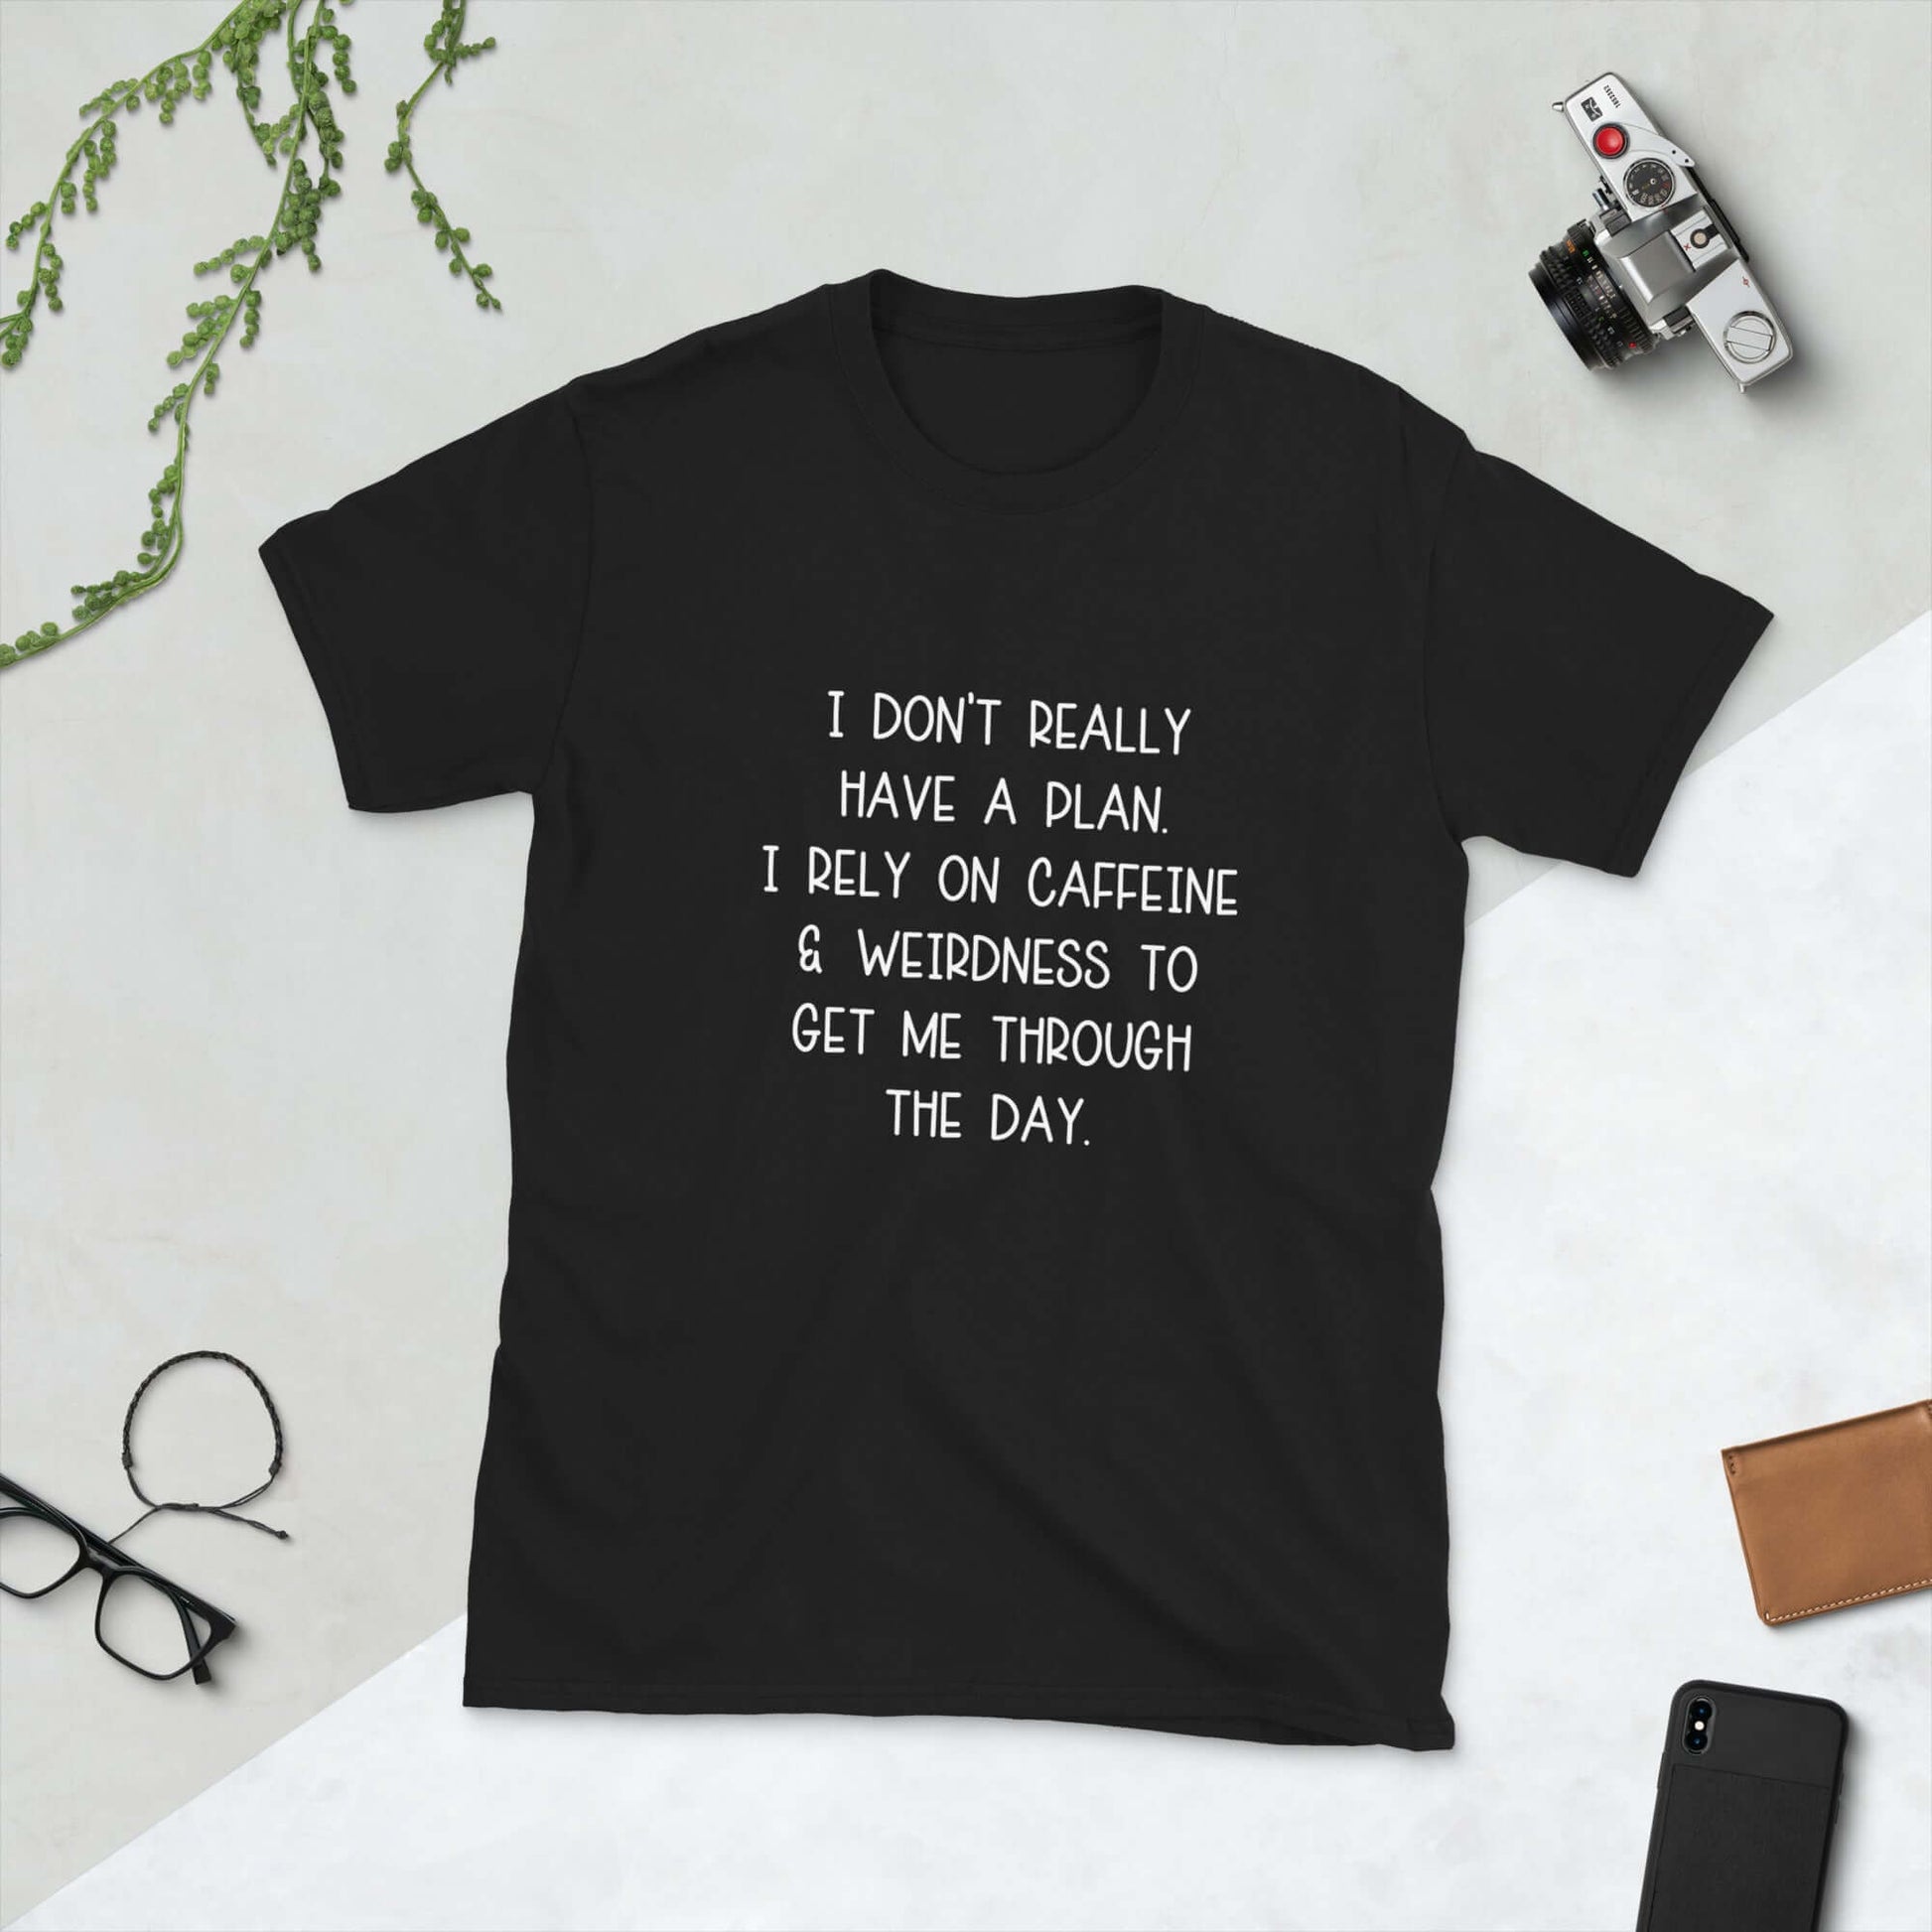 Black t-shirt with the words I don't really have a plan. I rely on caffeine & weirdness to get me through the day printed on the front.